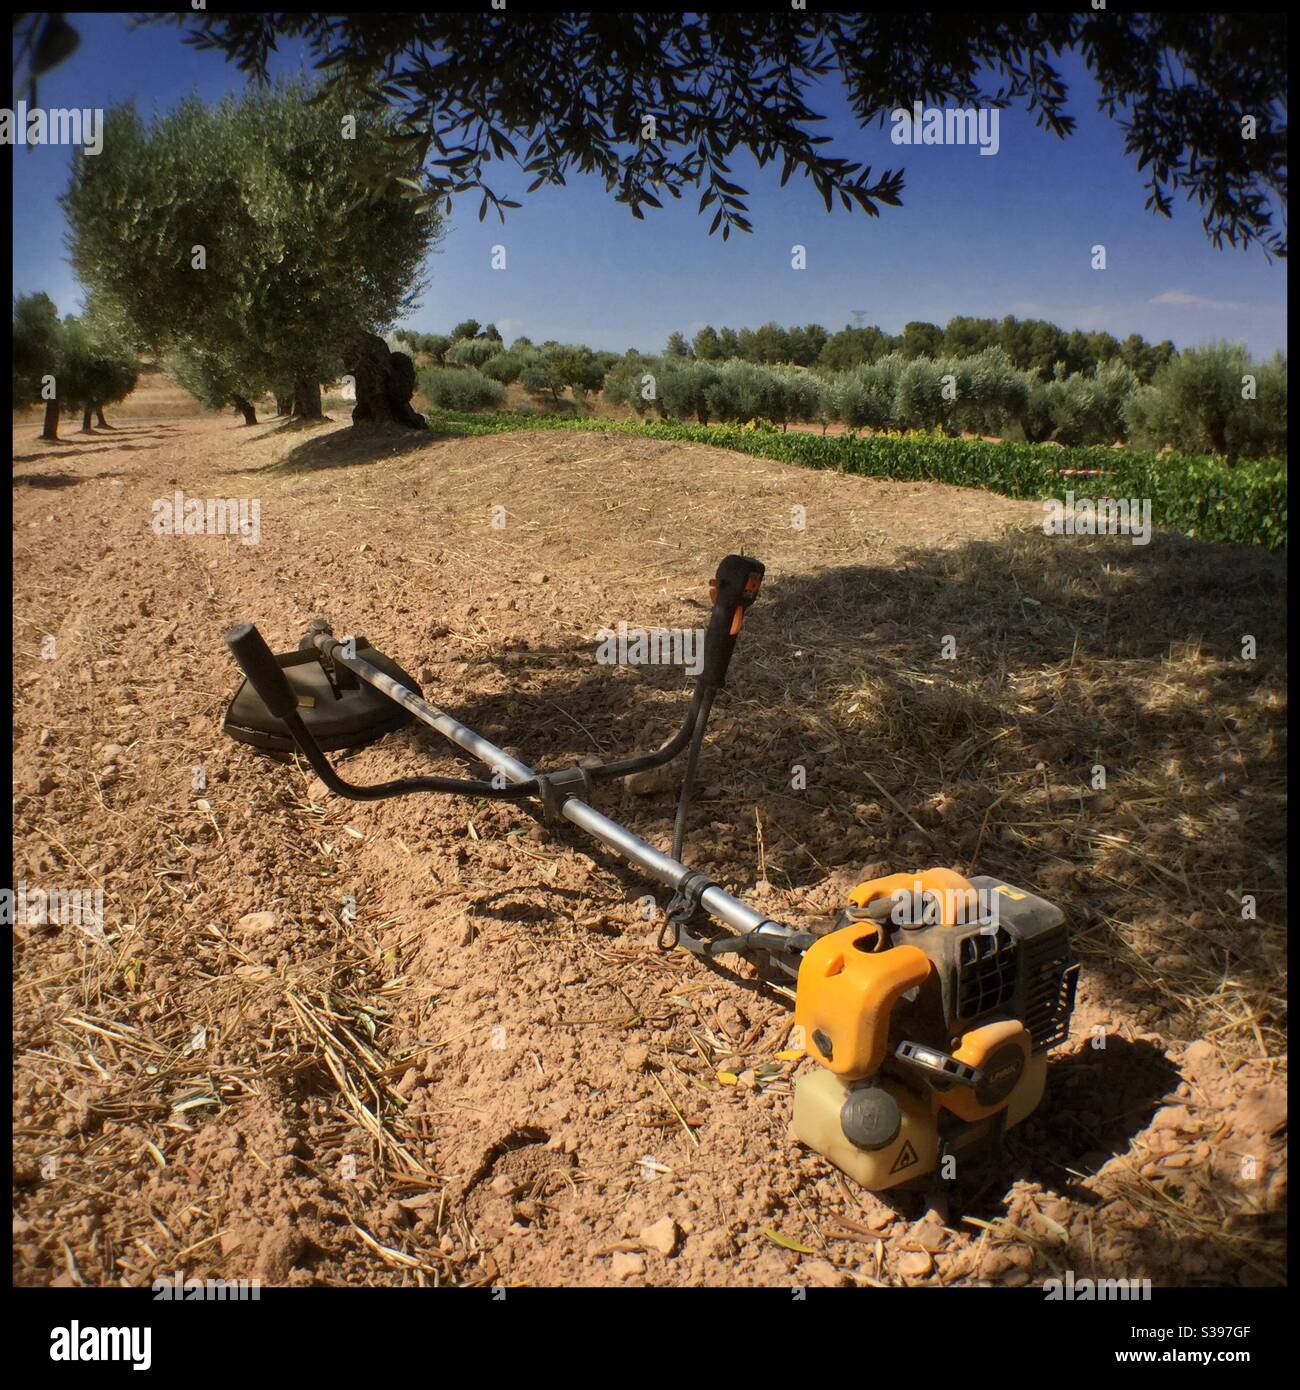 Strimming verges on an olive farm, Catalonia, Spain. Stock Photo